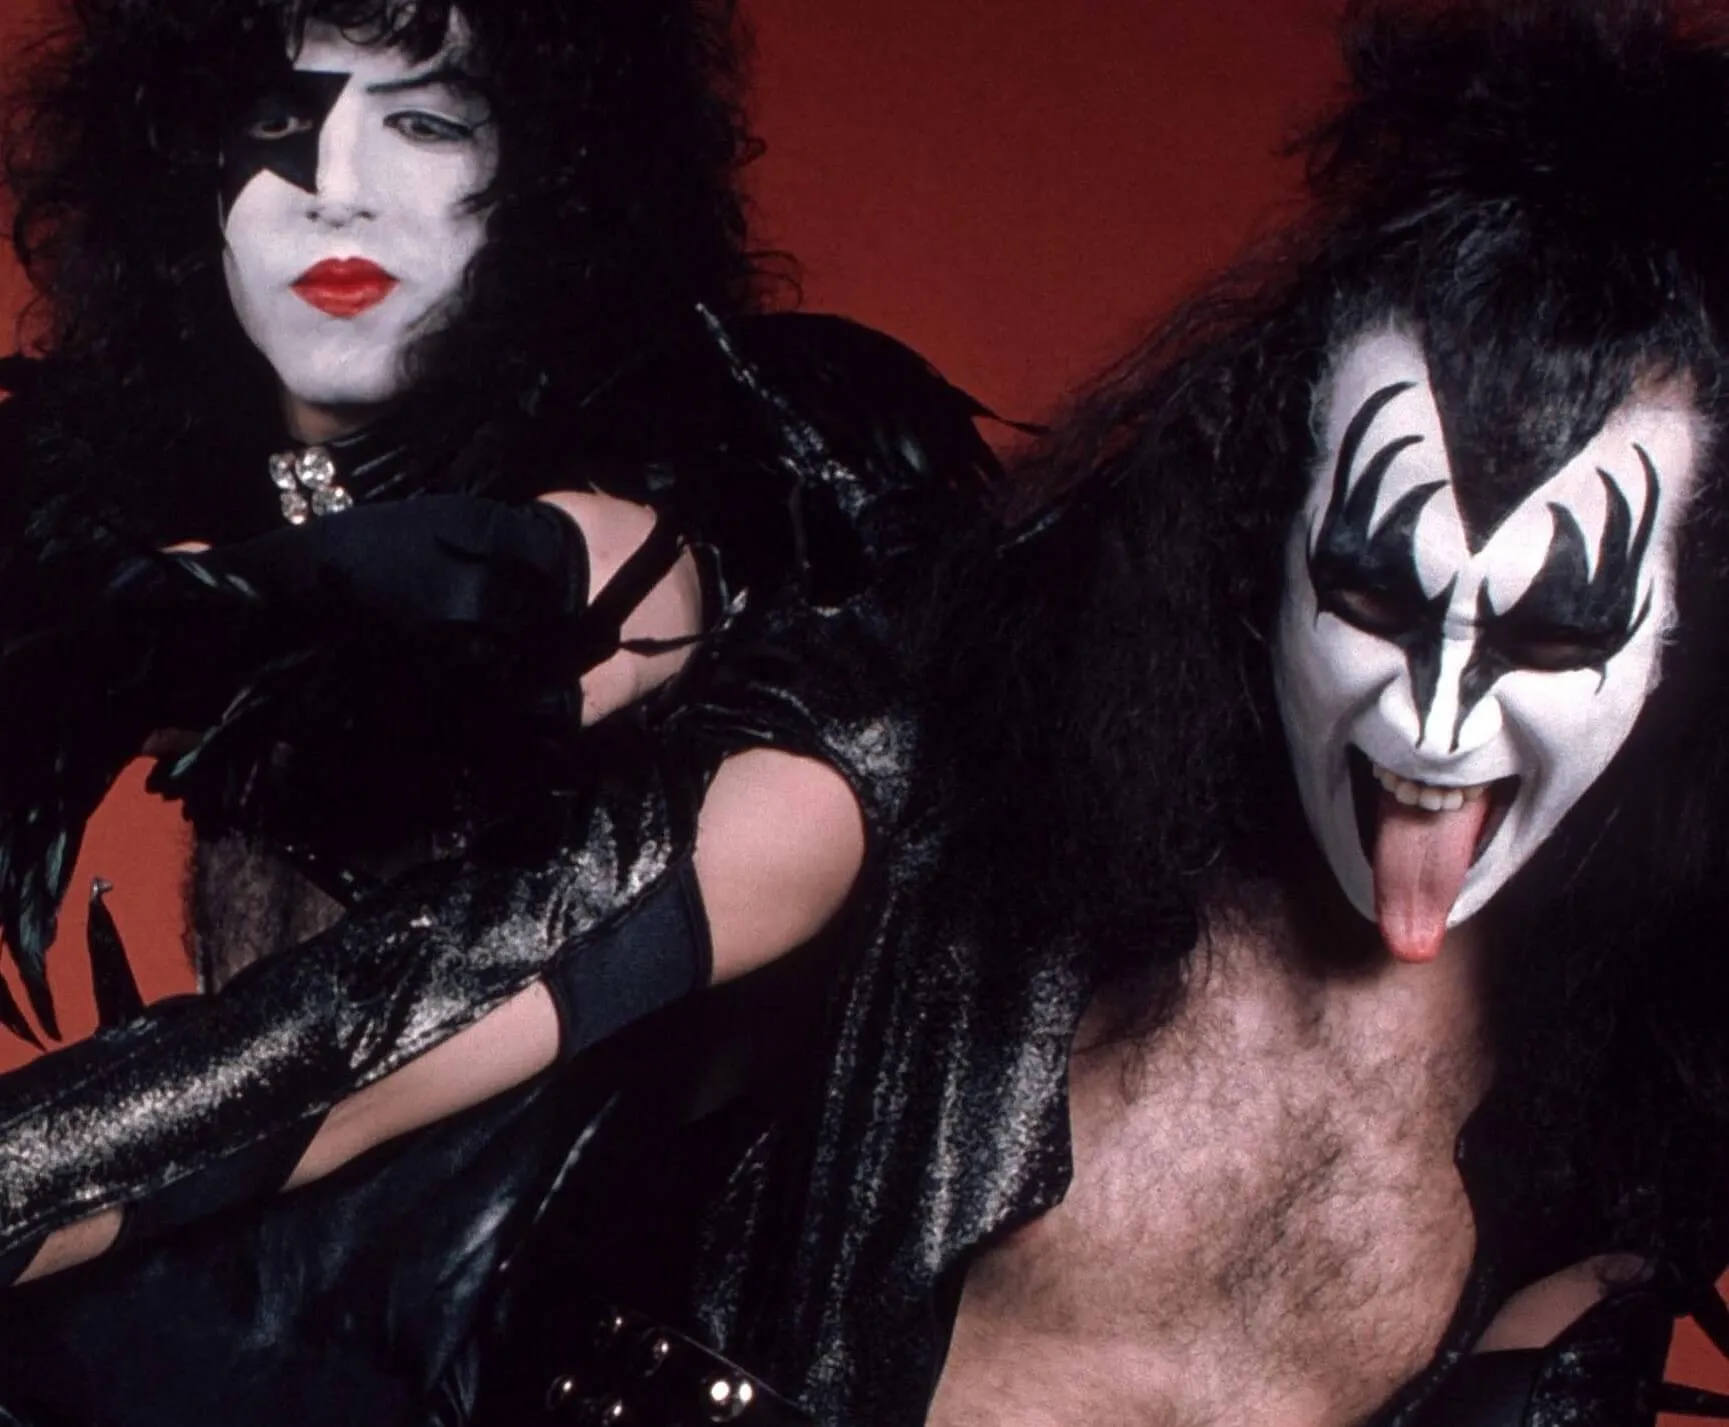 Paul Stanley and Gene Simmons of Kiss wearing makeup